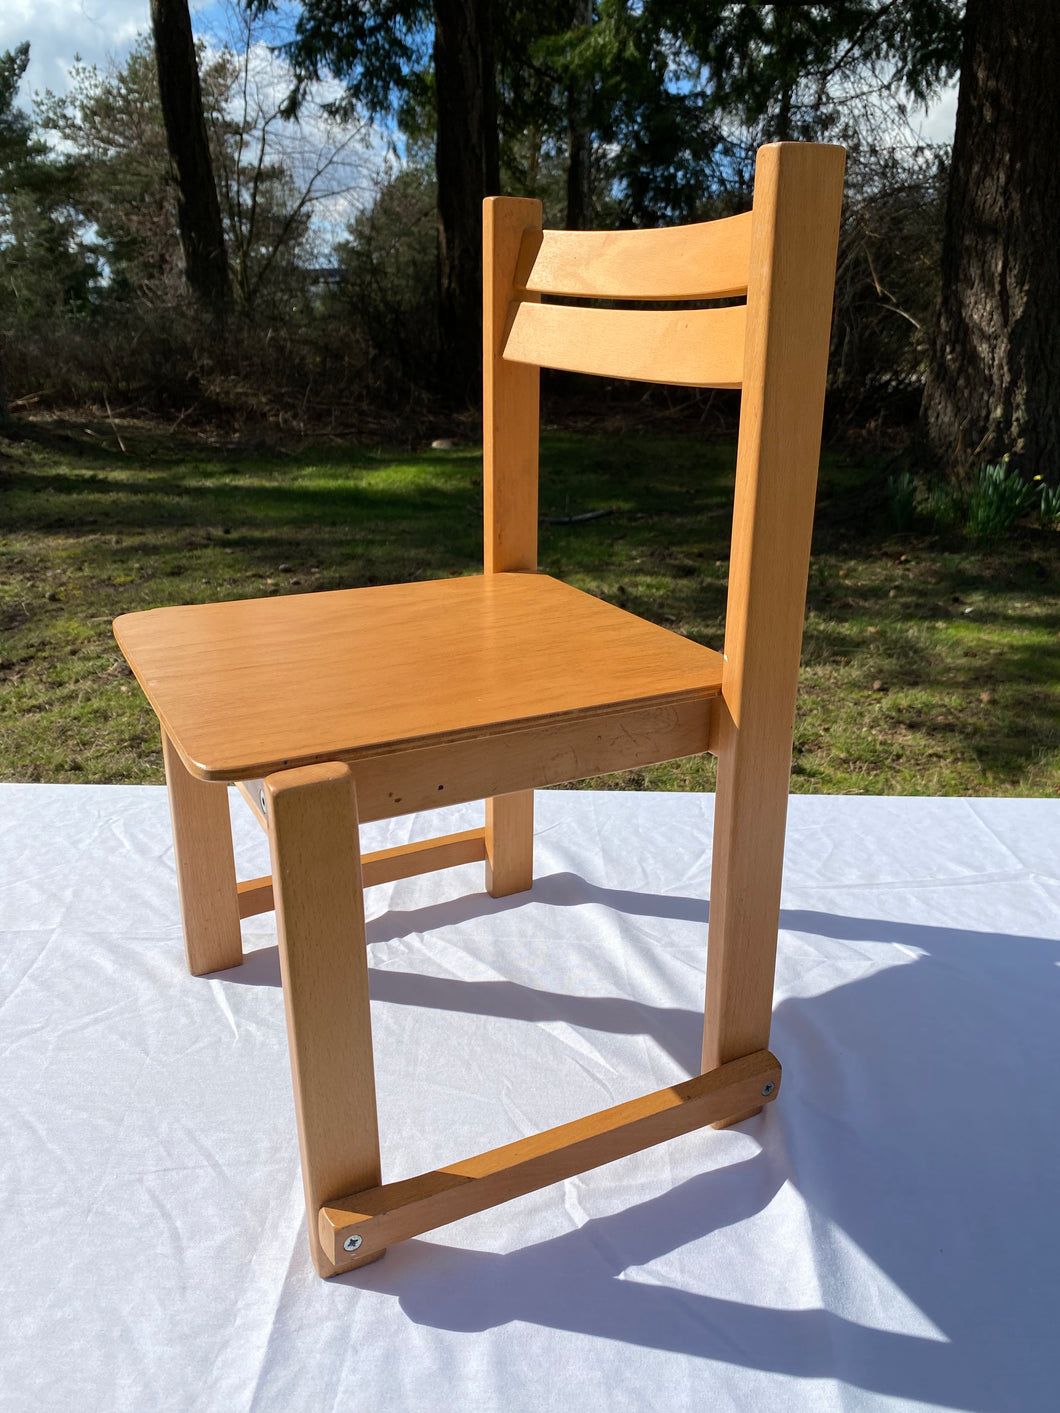 Wooden Chair # :11.5 Inches